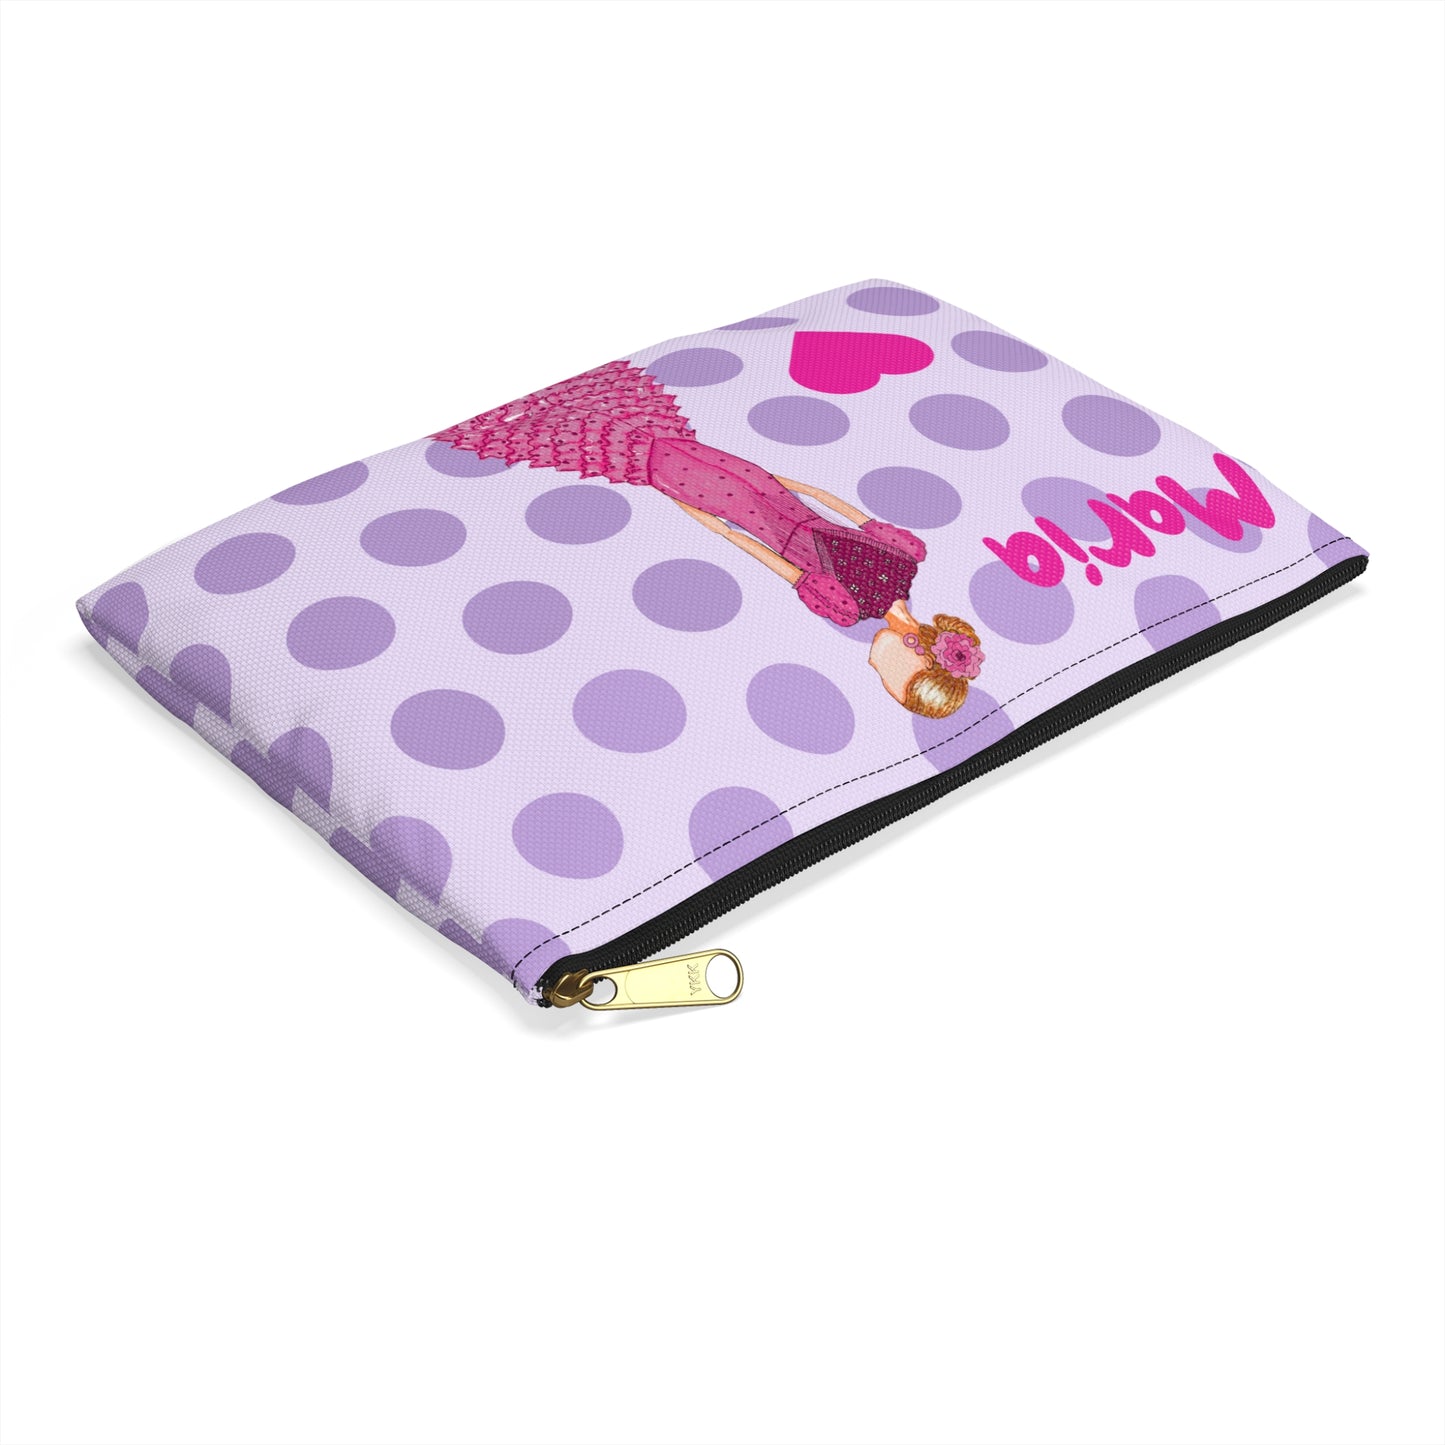 a purple polka dot purse with a picture of a woman on it